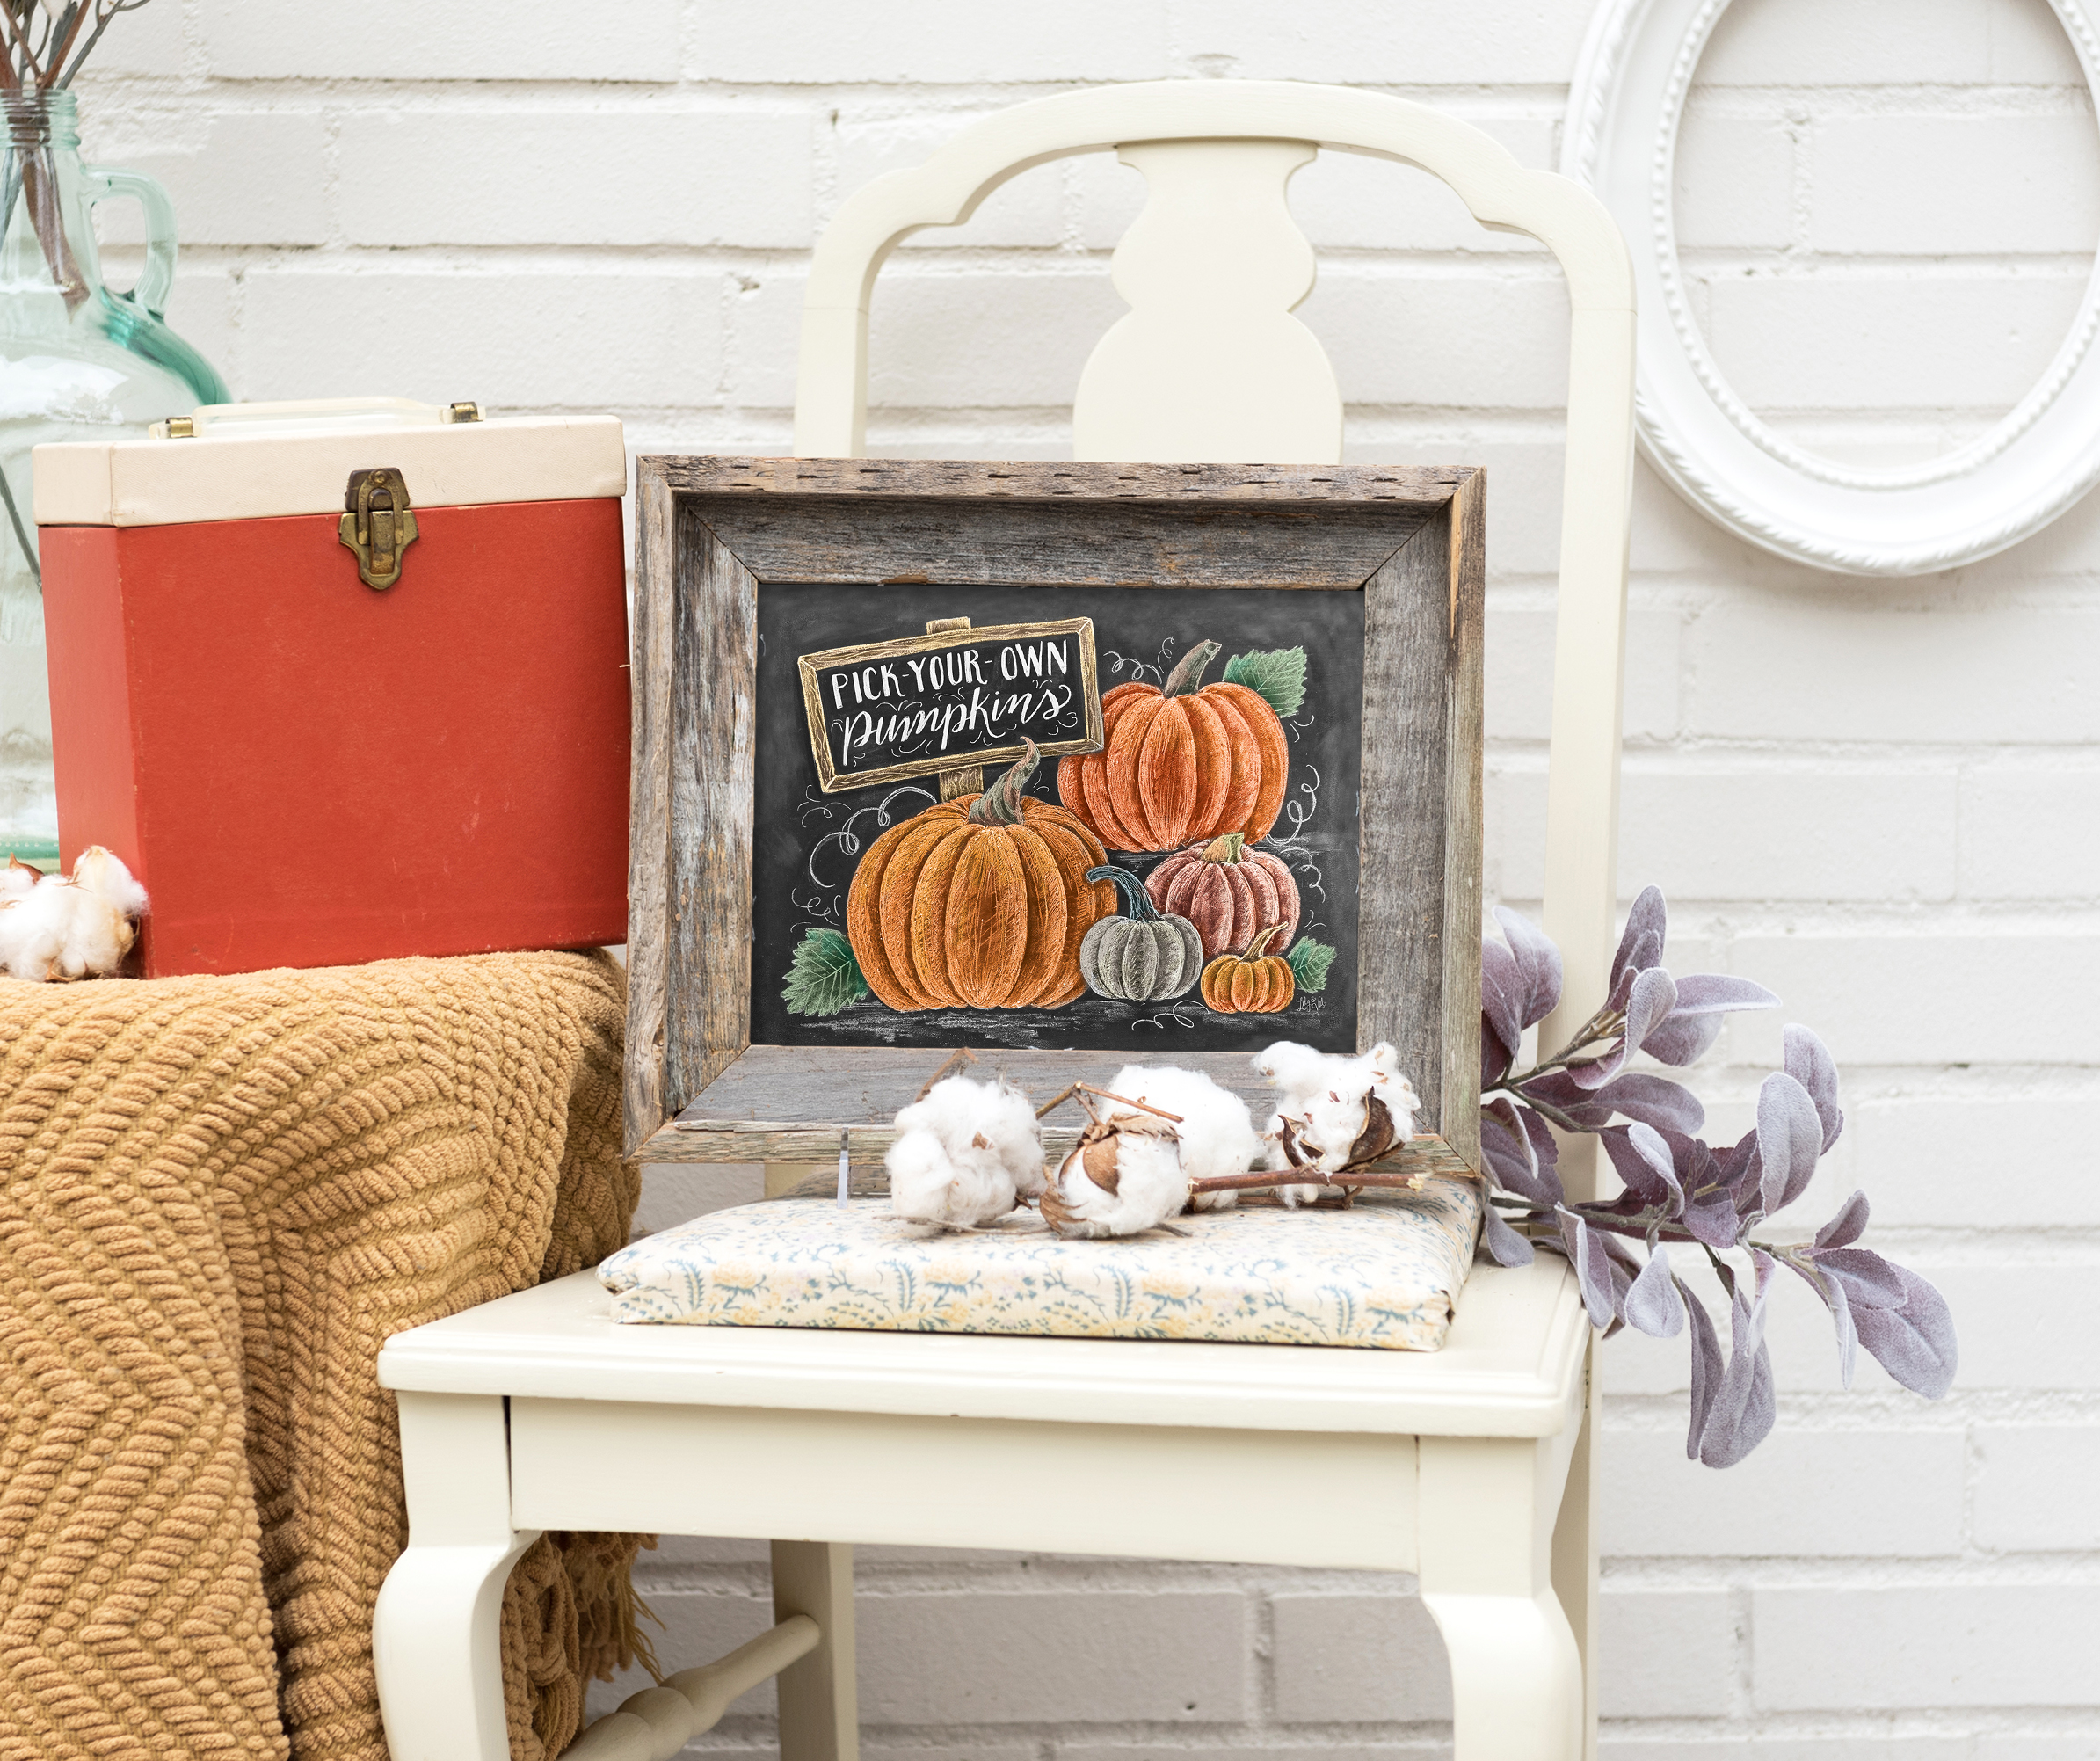 Bring a rustic chic touch to your fall decor with our Pick-your-own pumpkins chalkboard sign